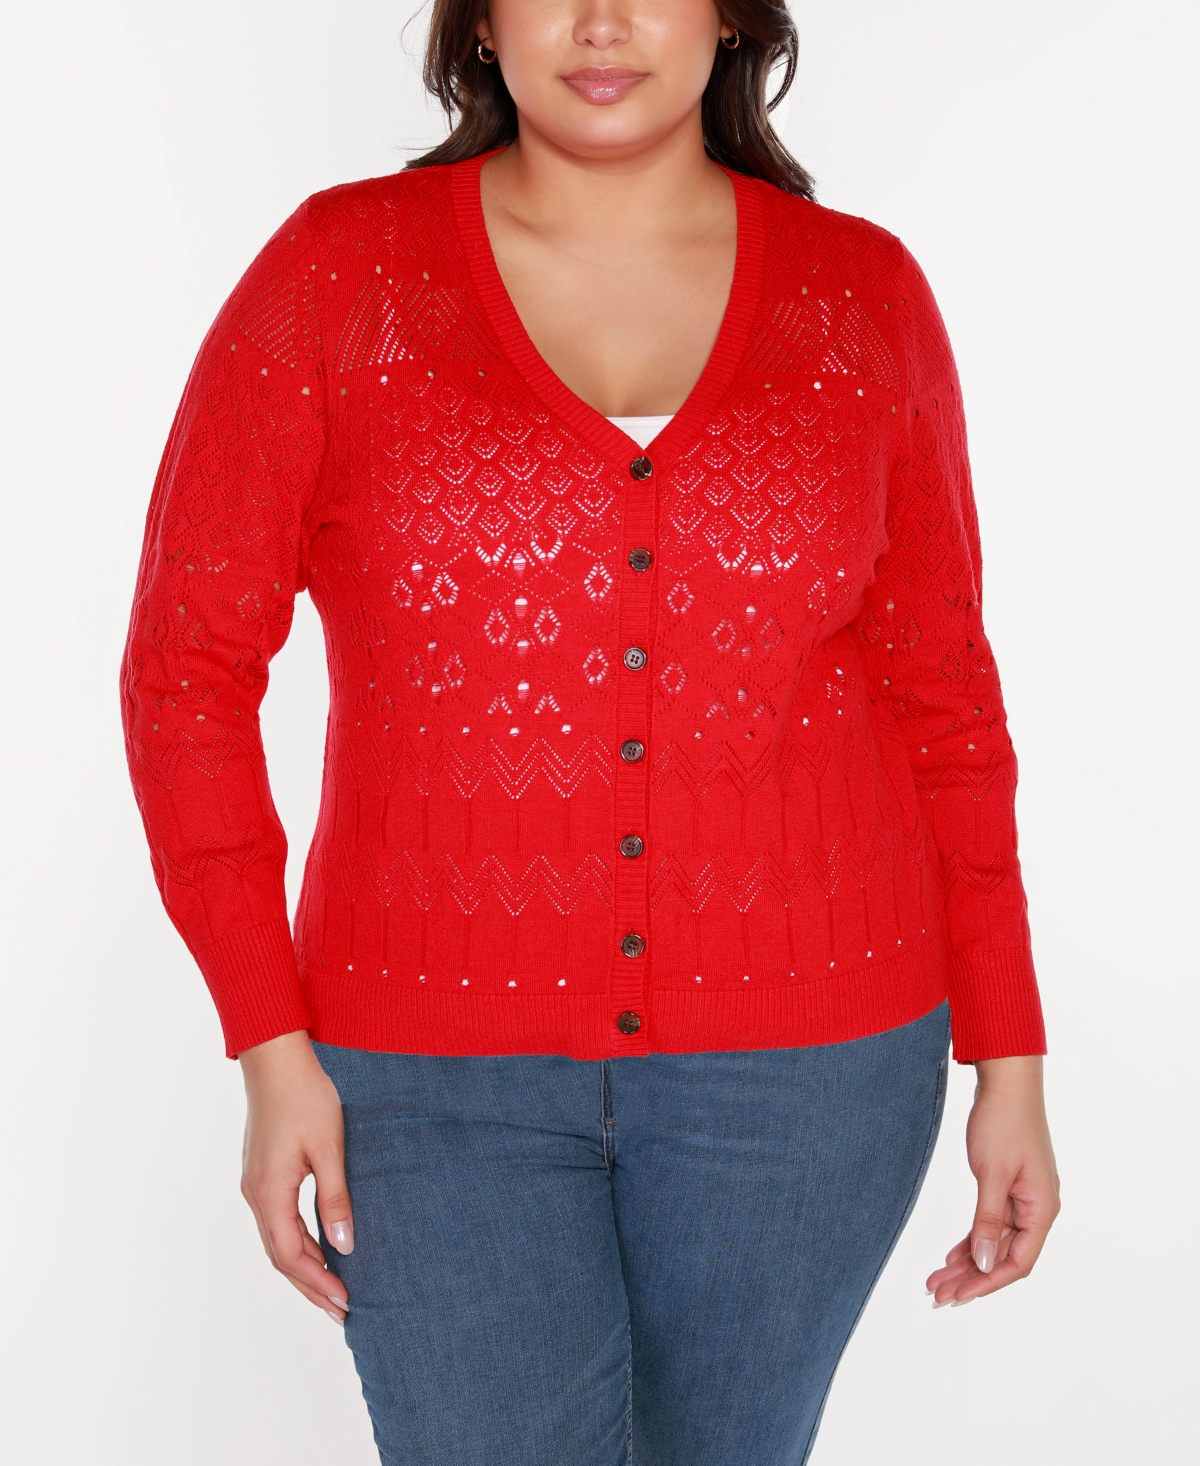 Belldini Black Label Plus Size Pointelle Button Front Cardigan Sweater In Infrared